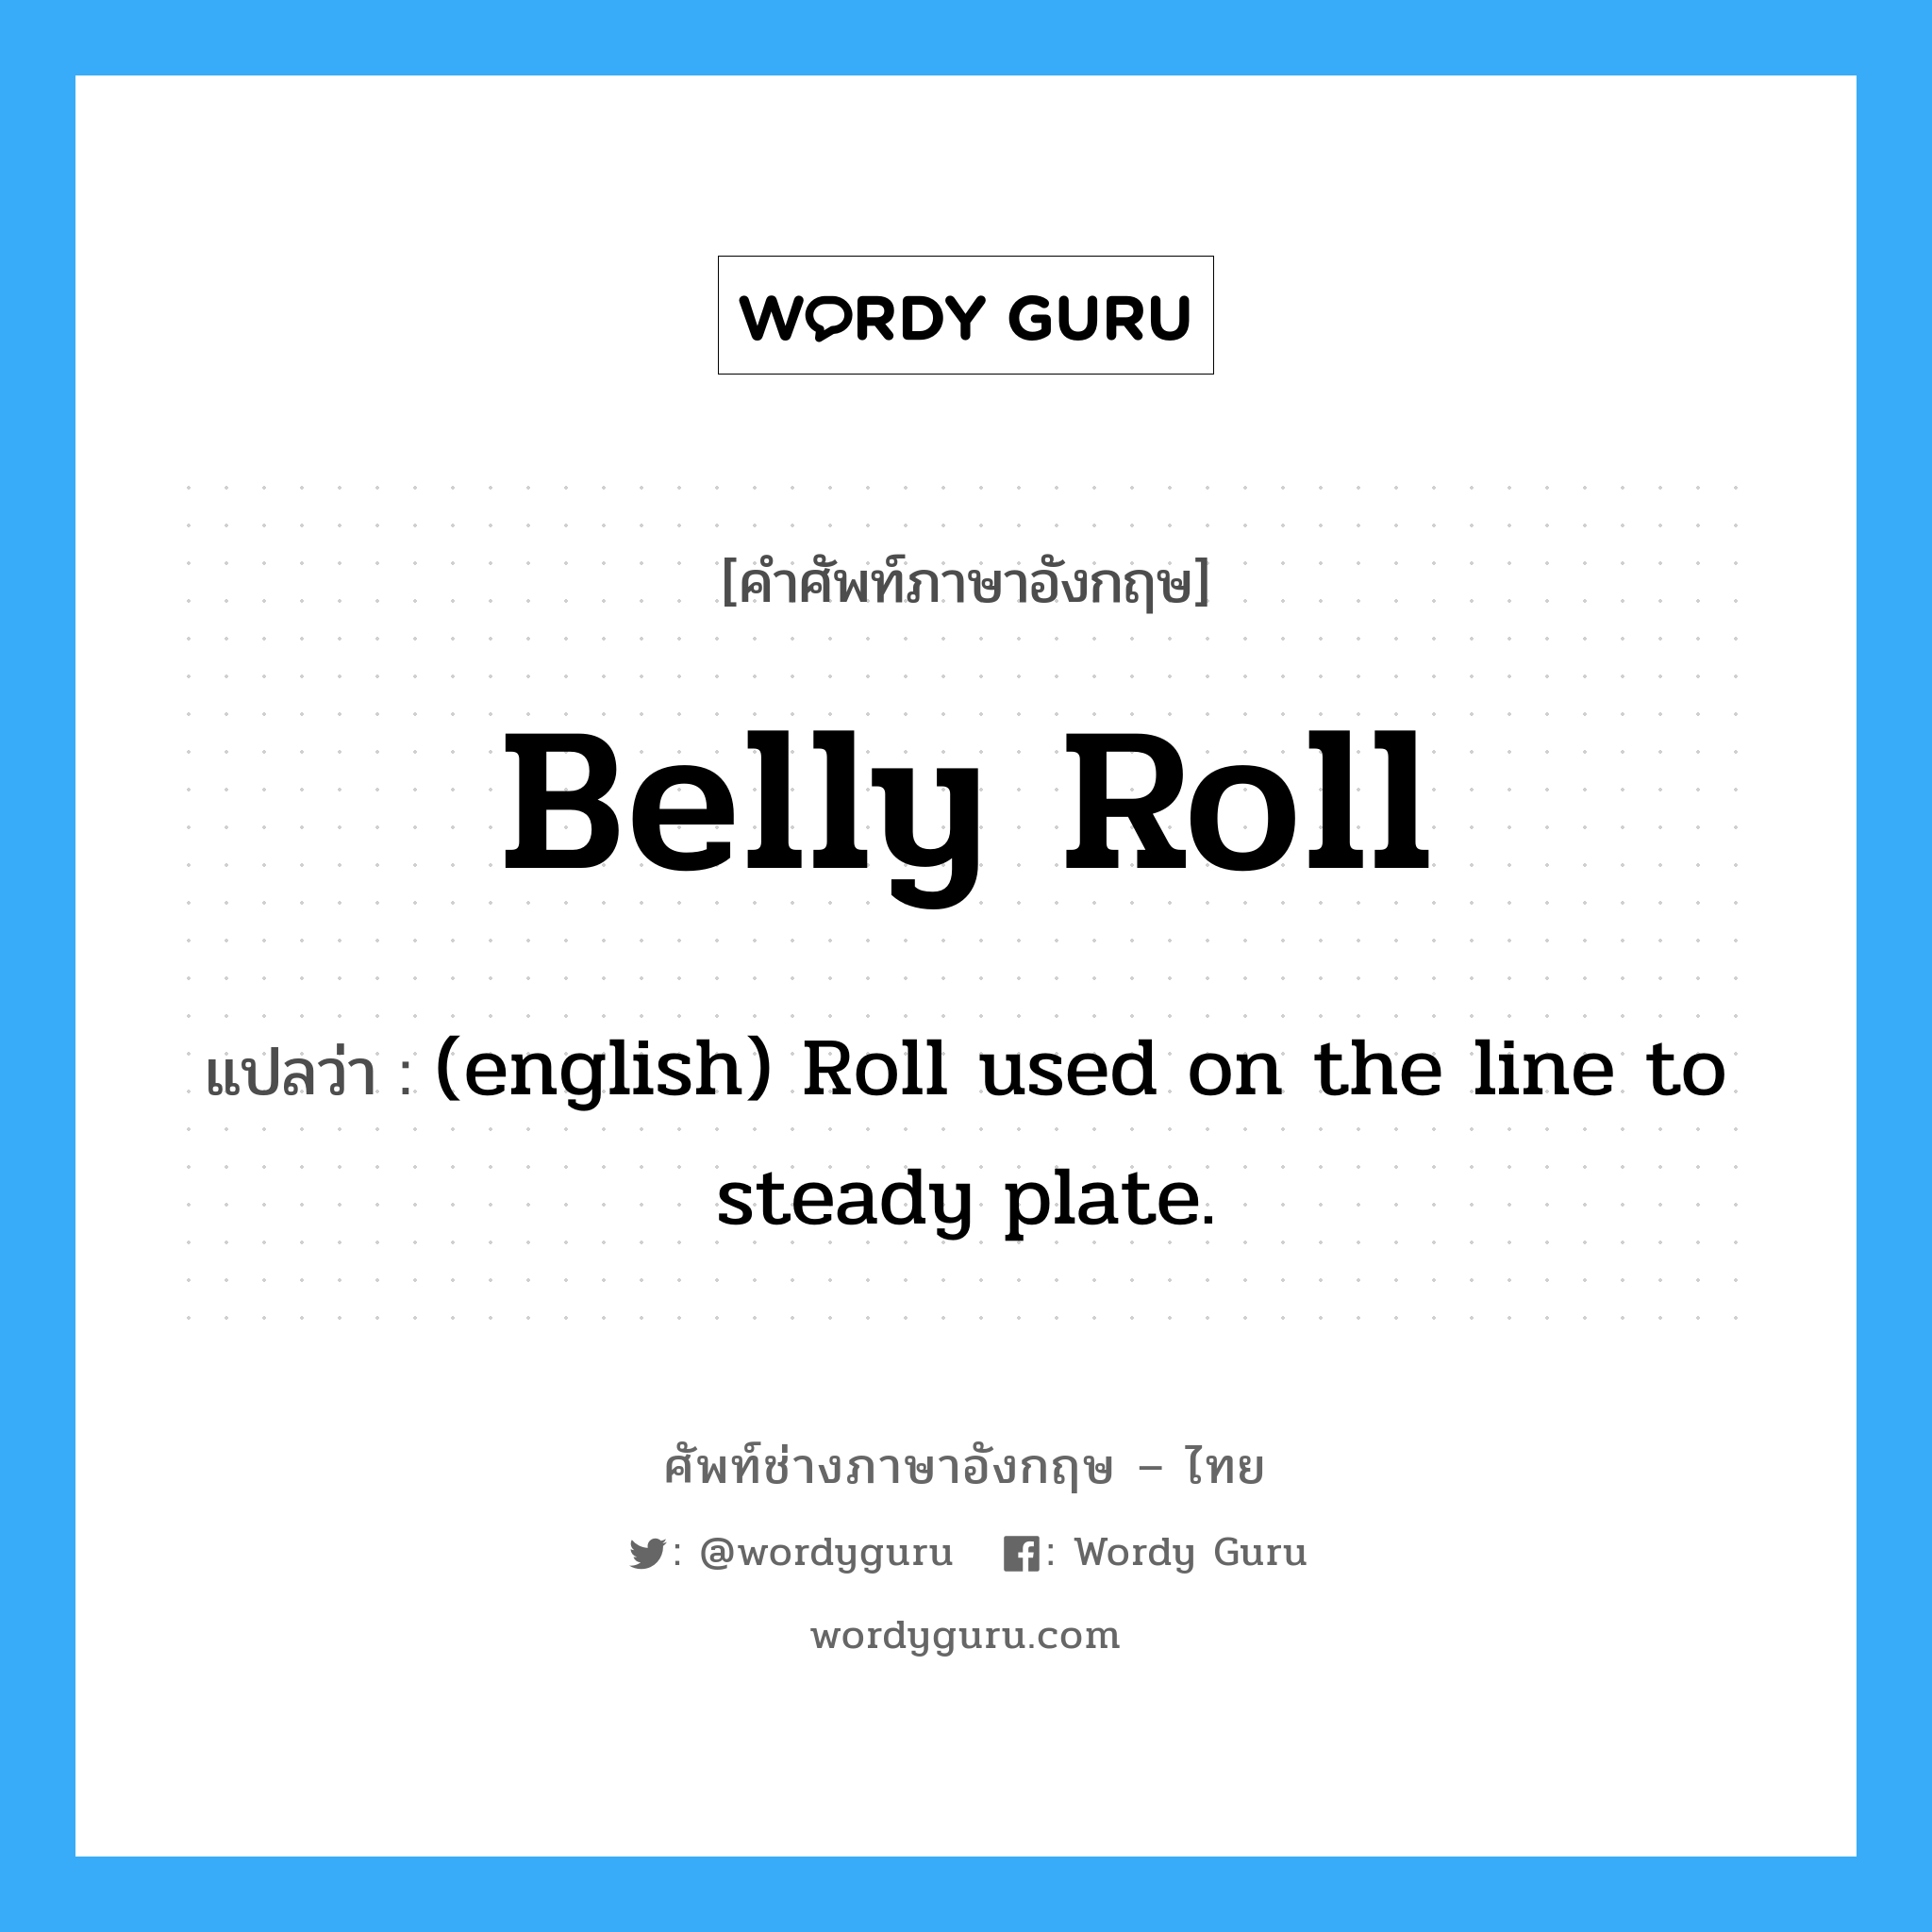 Belly Roll แปลว่า?, คำศัพท์ช่างภาษาอังกฤษ - ไทย Belly Roll คำศัพท์ภาษาอังกฤษ Belly Roll แปลว่า (english) Roll used on the line to steady plate.